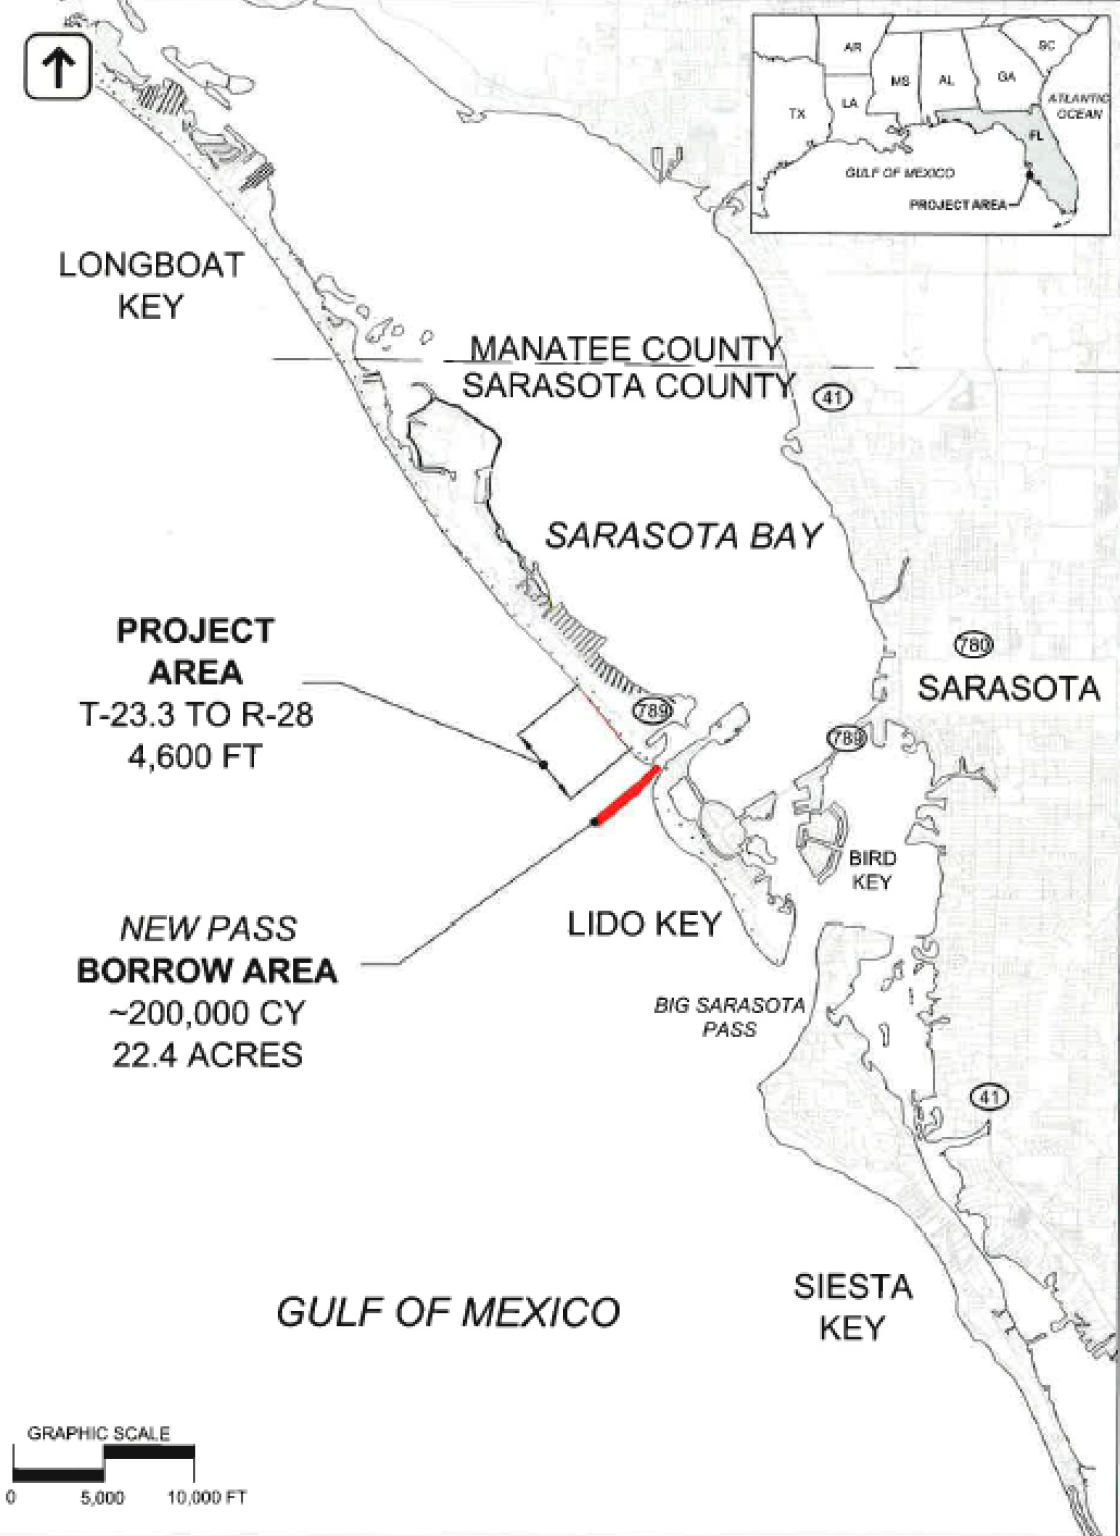 A map outlines the town of Longboat Key's plans for New Pass groin maintenance and south-end nourishment.